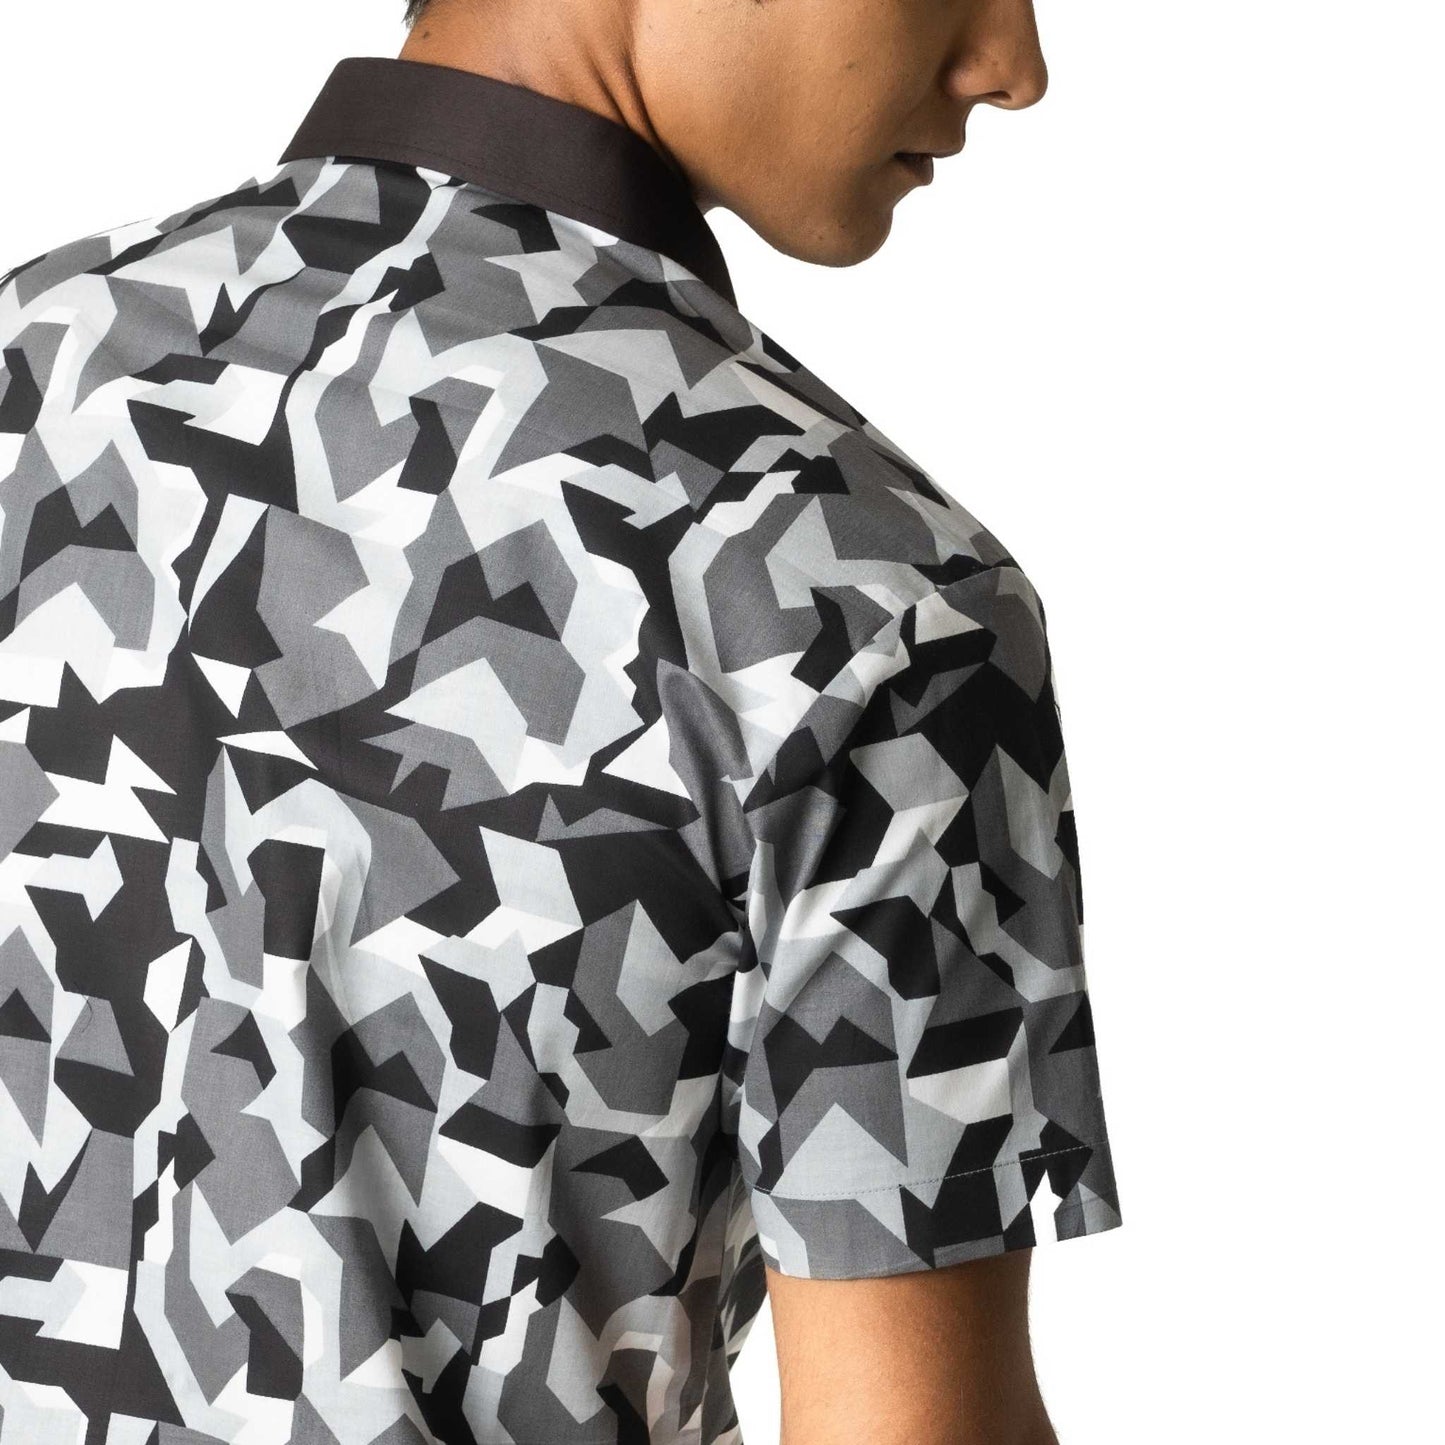 Short sleeve shirt in pixel printed poplin with contrast collar band and half concealed placket